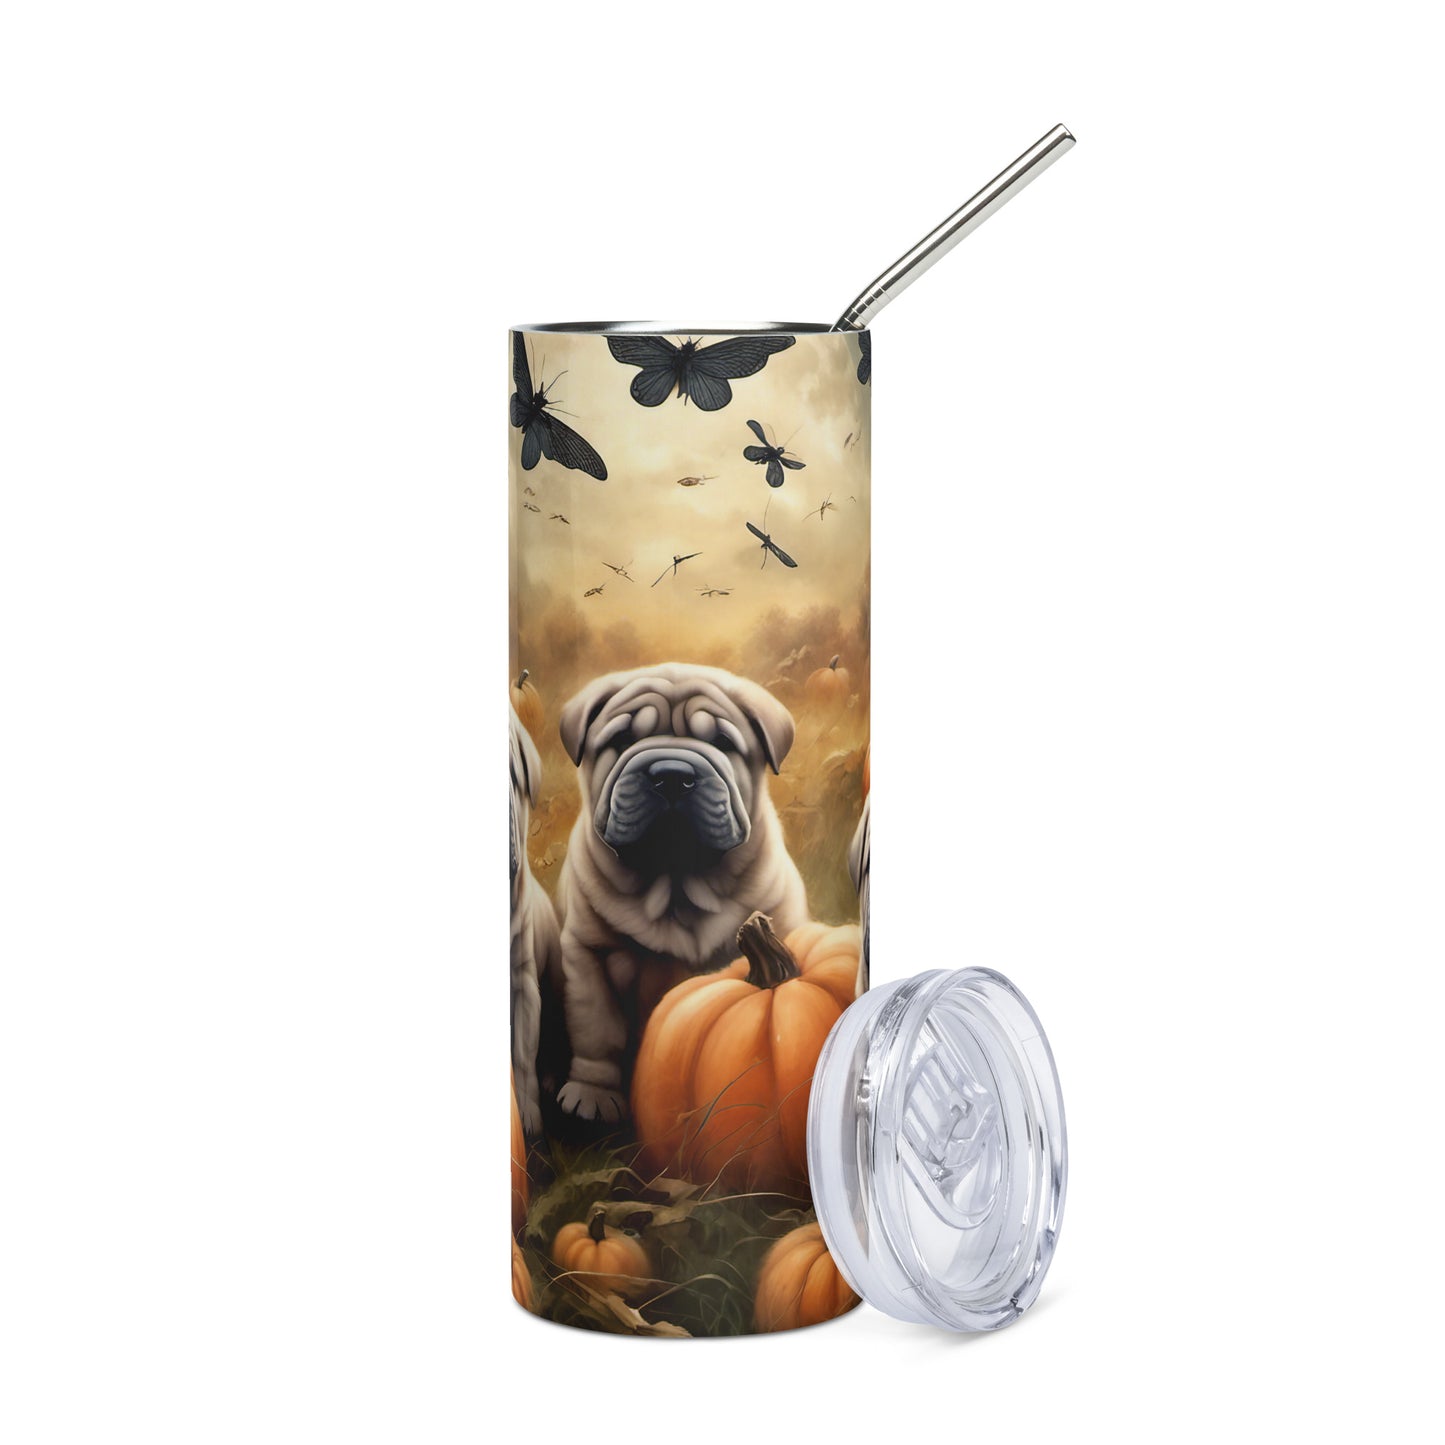 Shar Pei Puppies Playing in the Fall Pumpkin Patch Stainless steel tumbler CedarHill Country Market